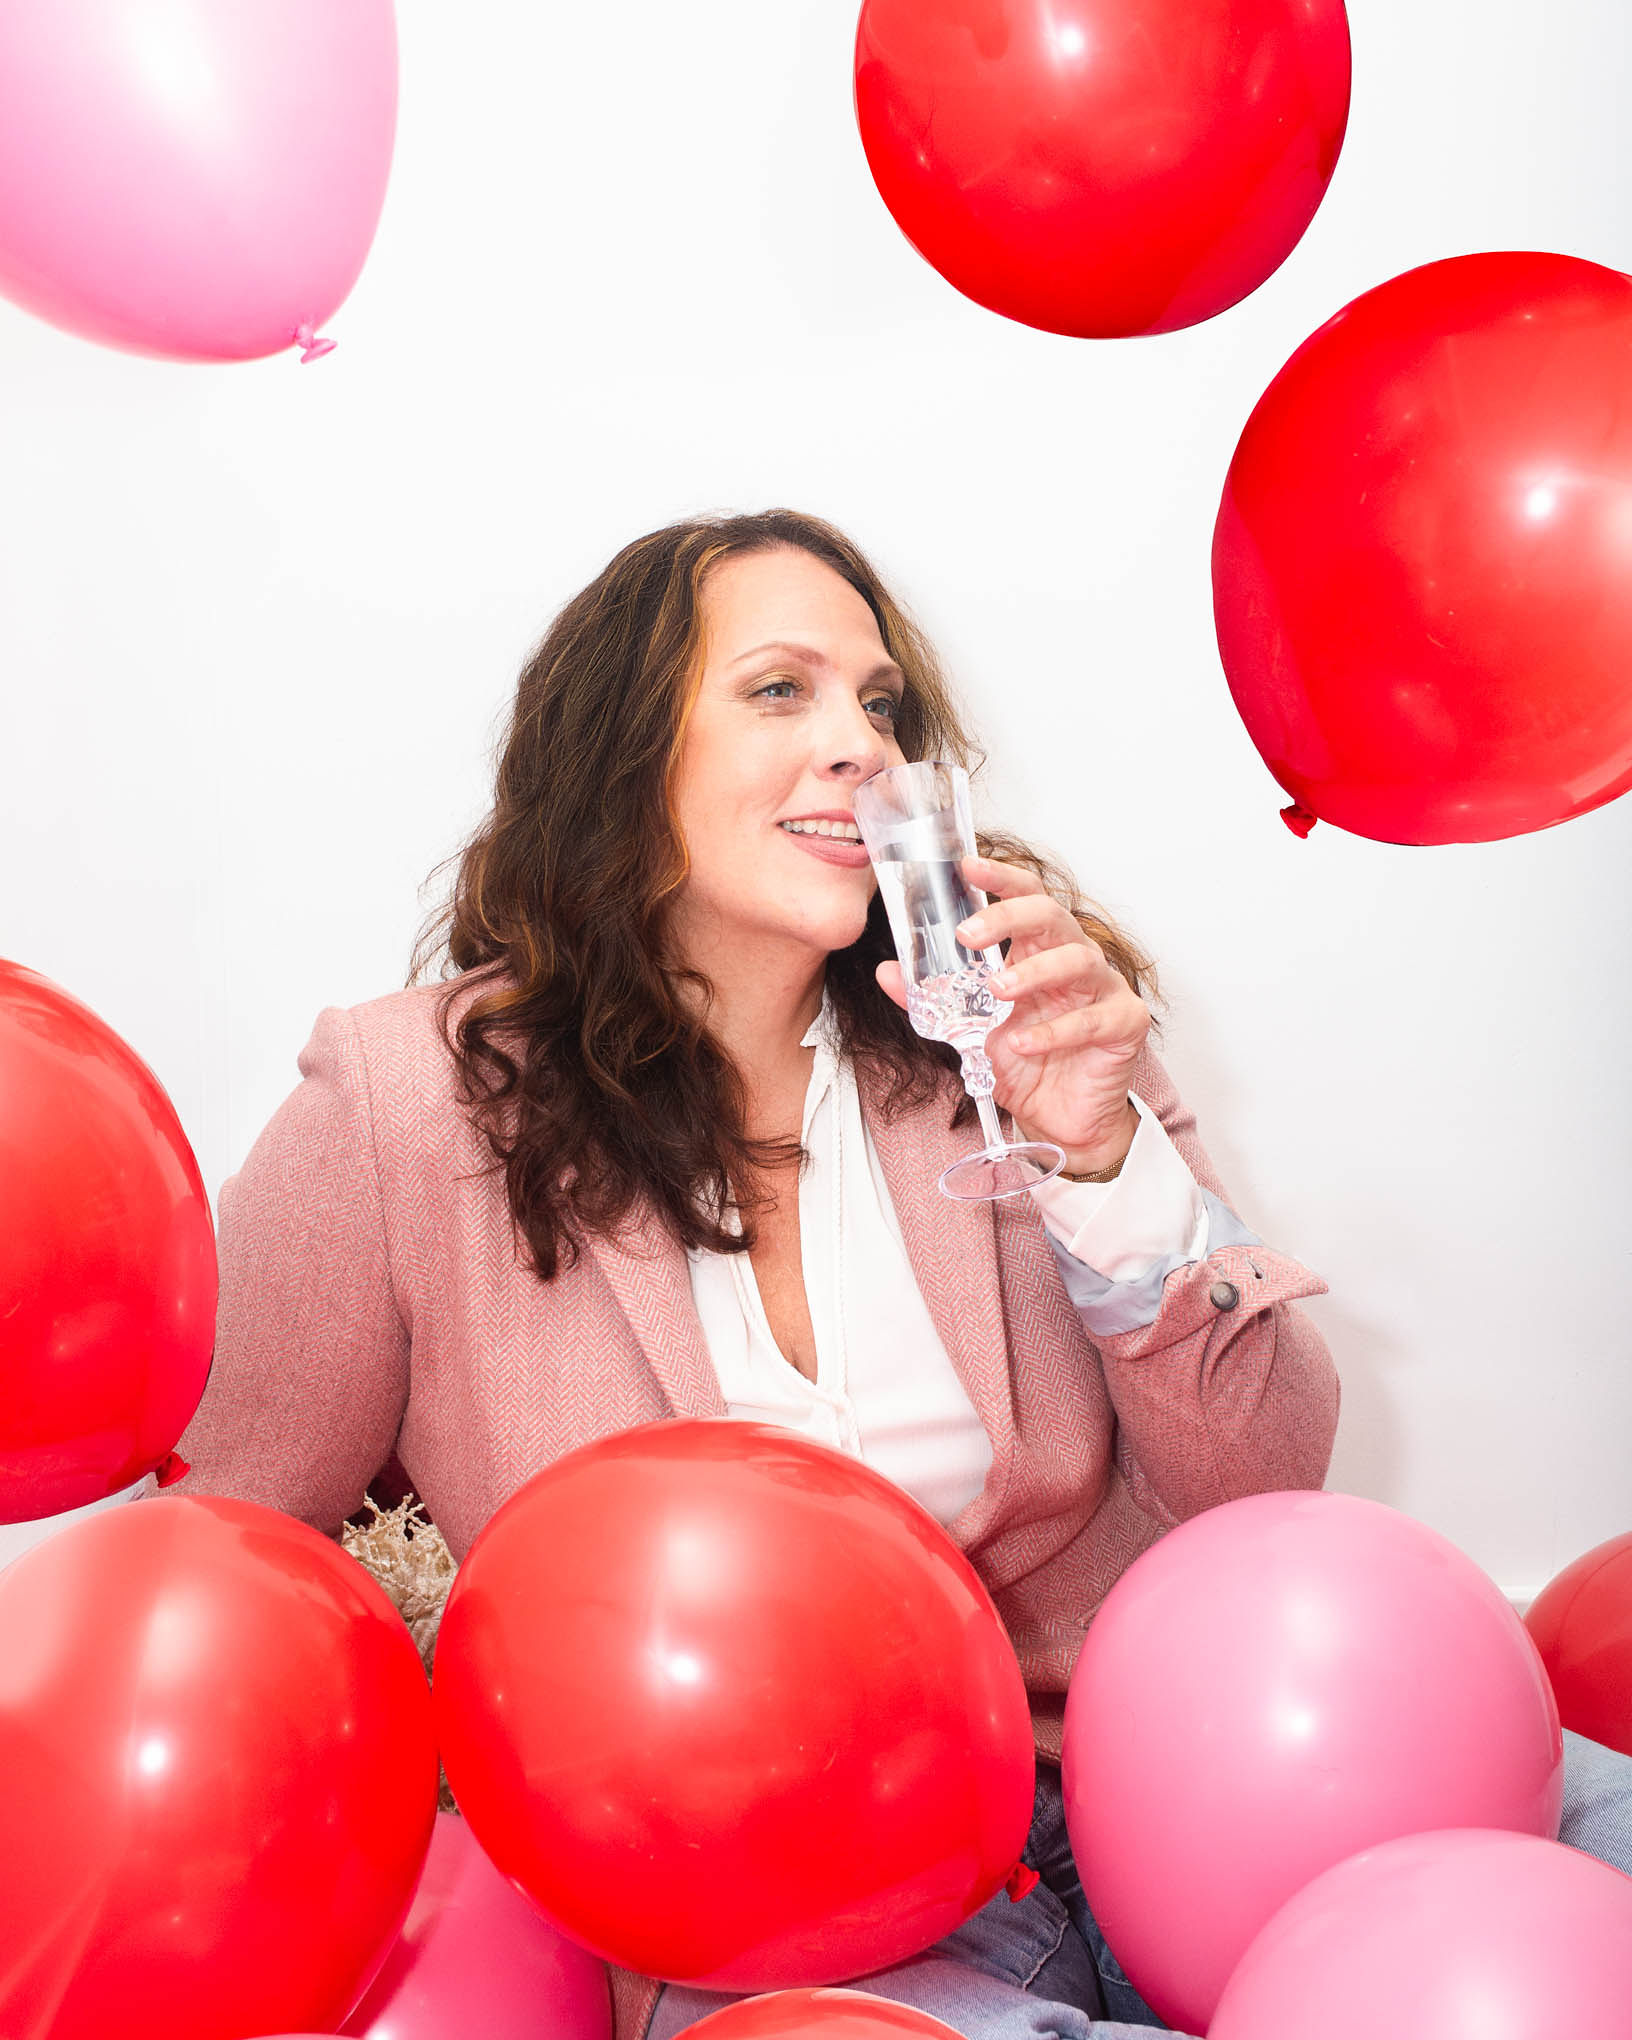 Andrea Arth drinking champagne and surrounded by pink and red balloons, date night spots recommendations for Wilmington, NC